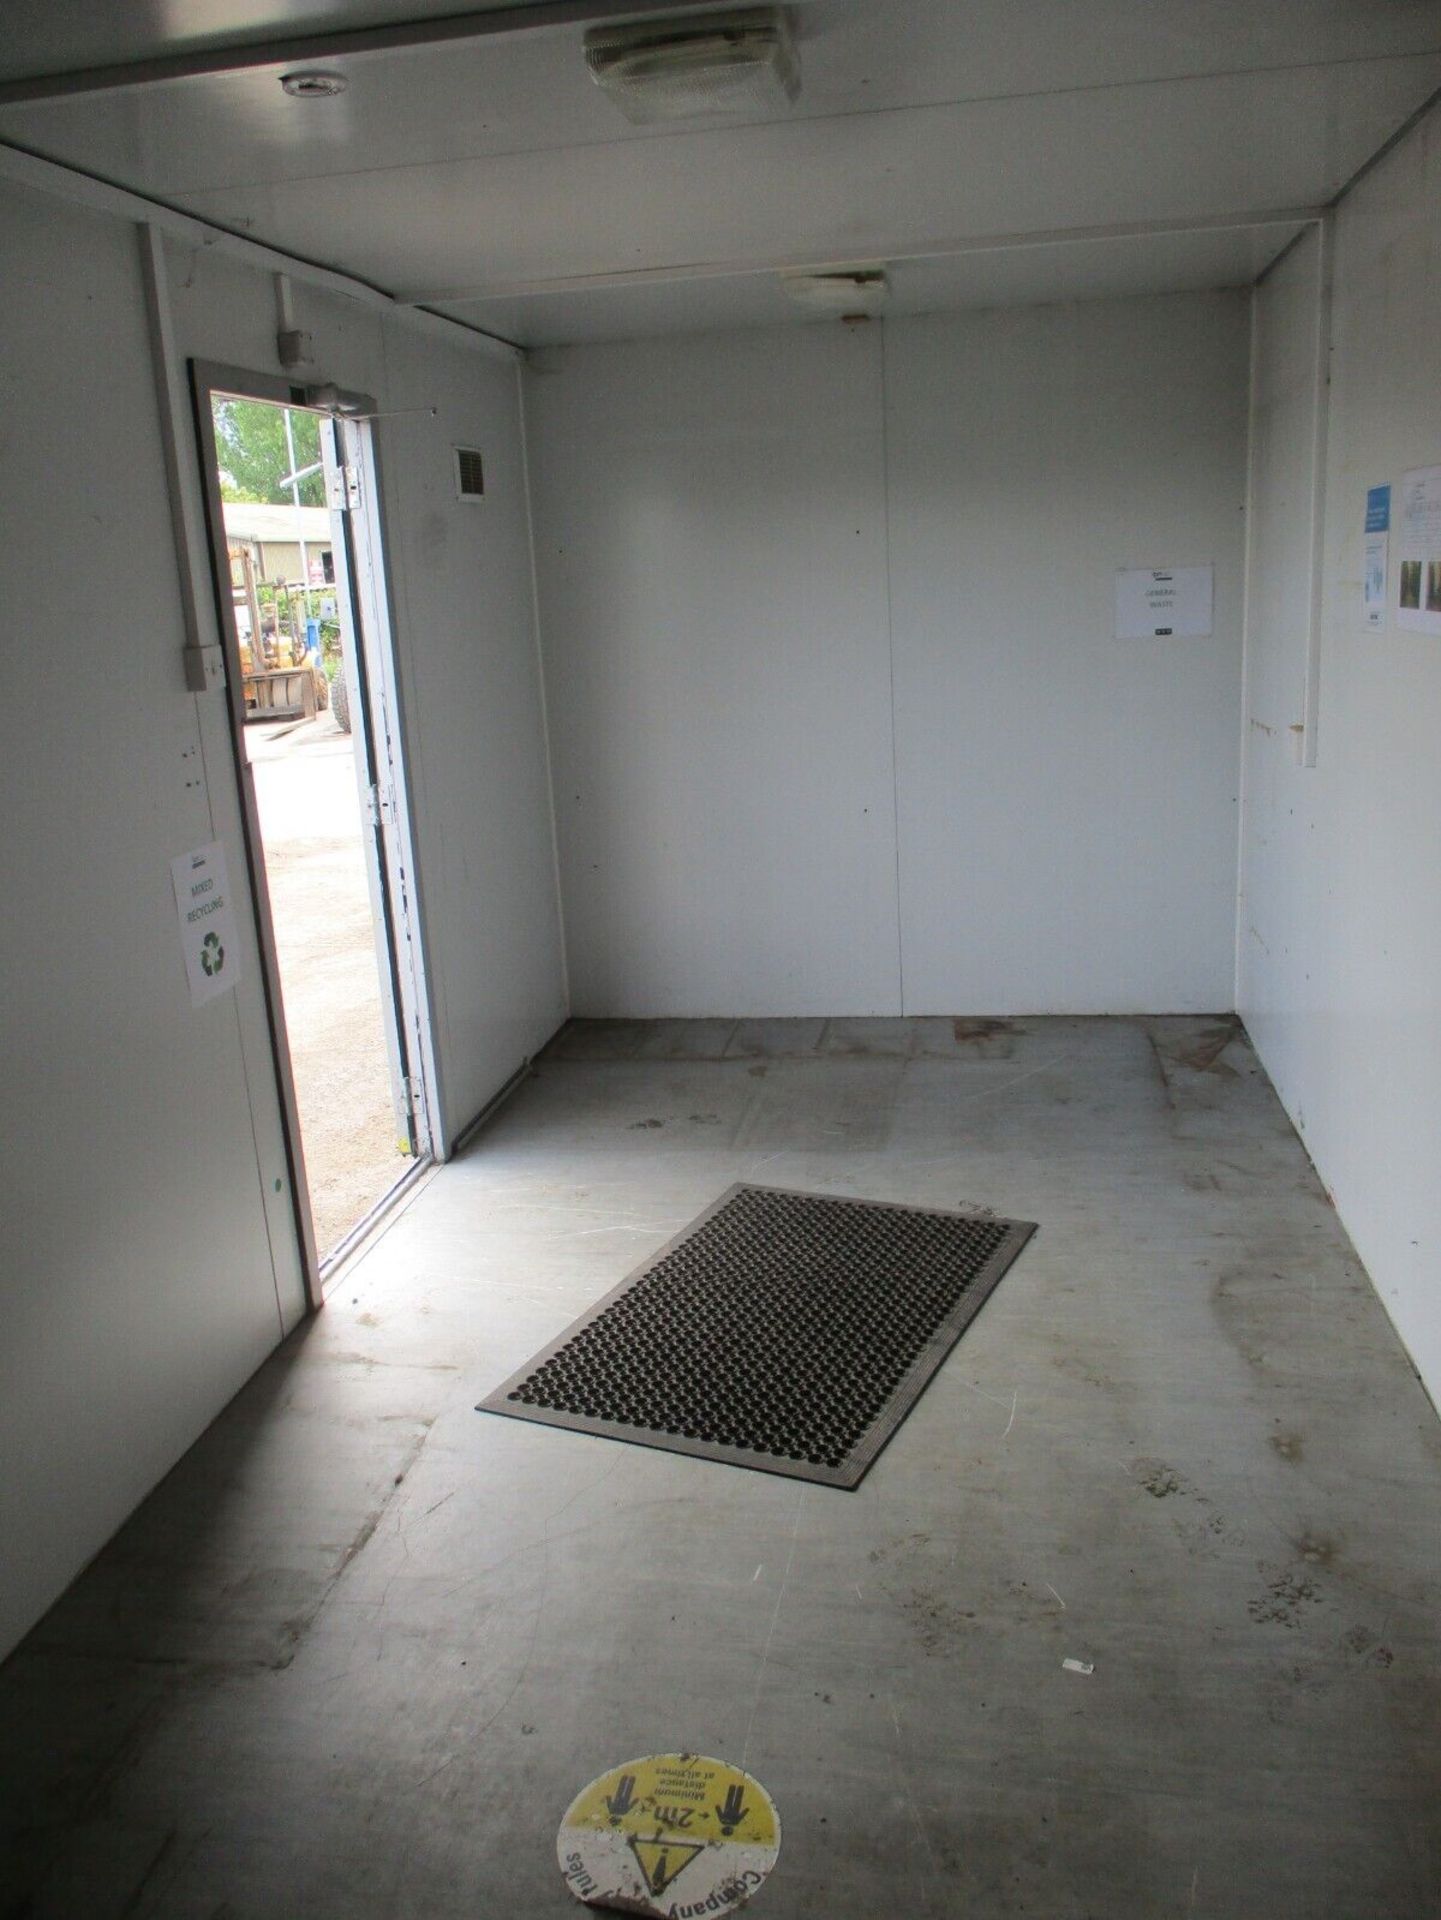 20 X 8 FT FEET FOOT SECURE SHIPPING CONTAINER CANTEEN OFFICE - Image 7 of 8